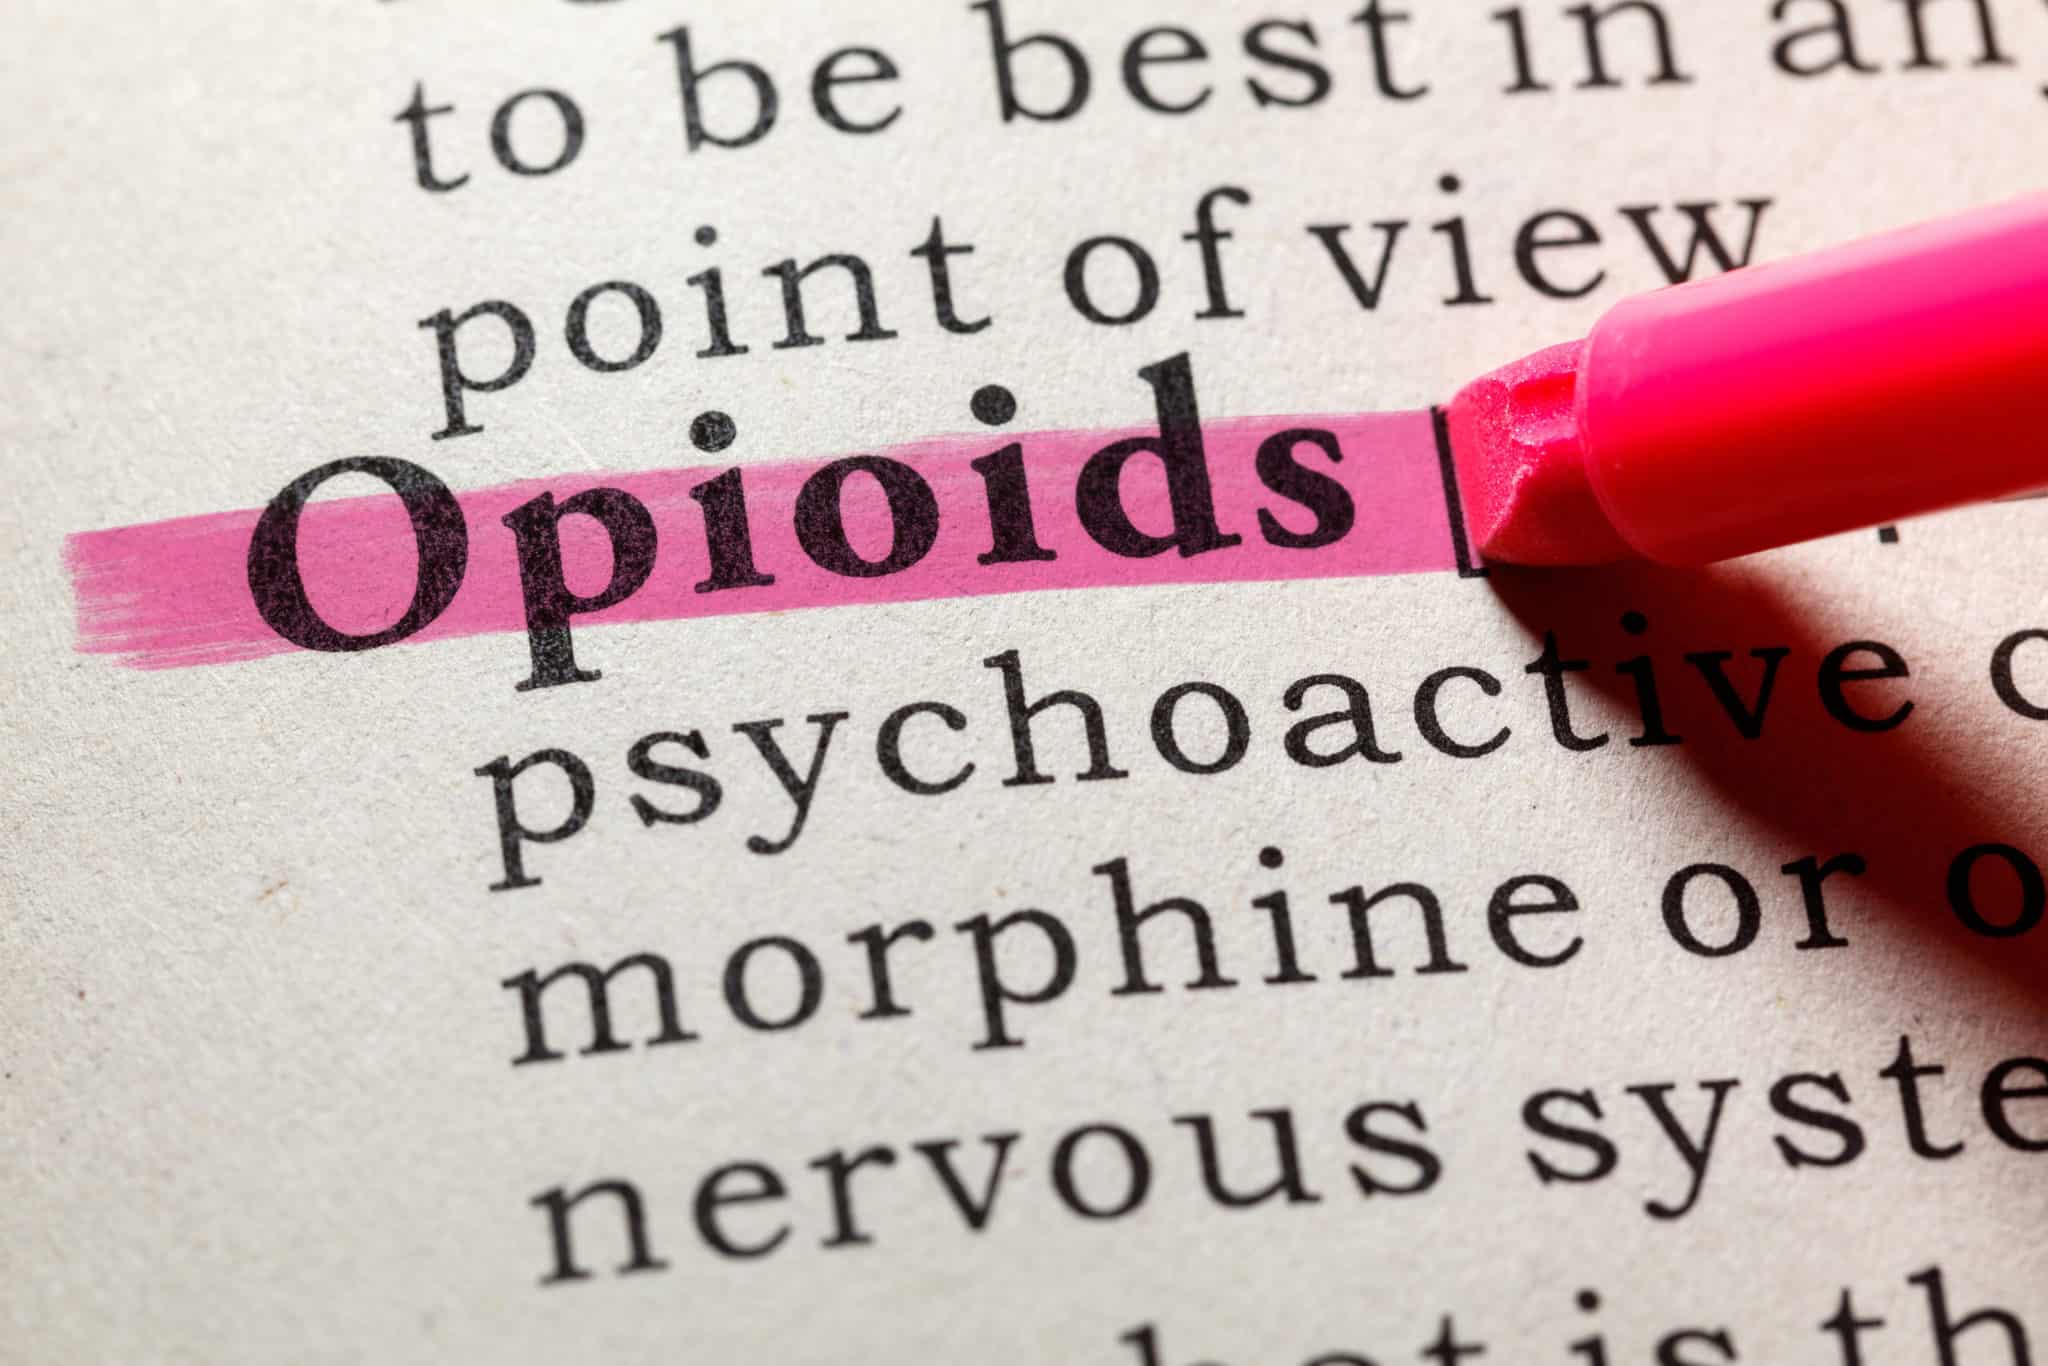 Stock art: "opioids" highlighted in textbook